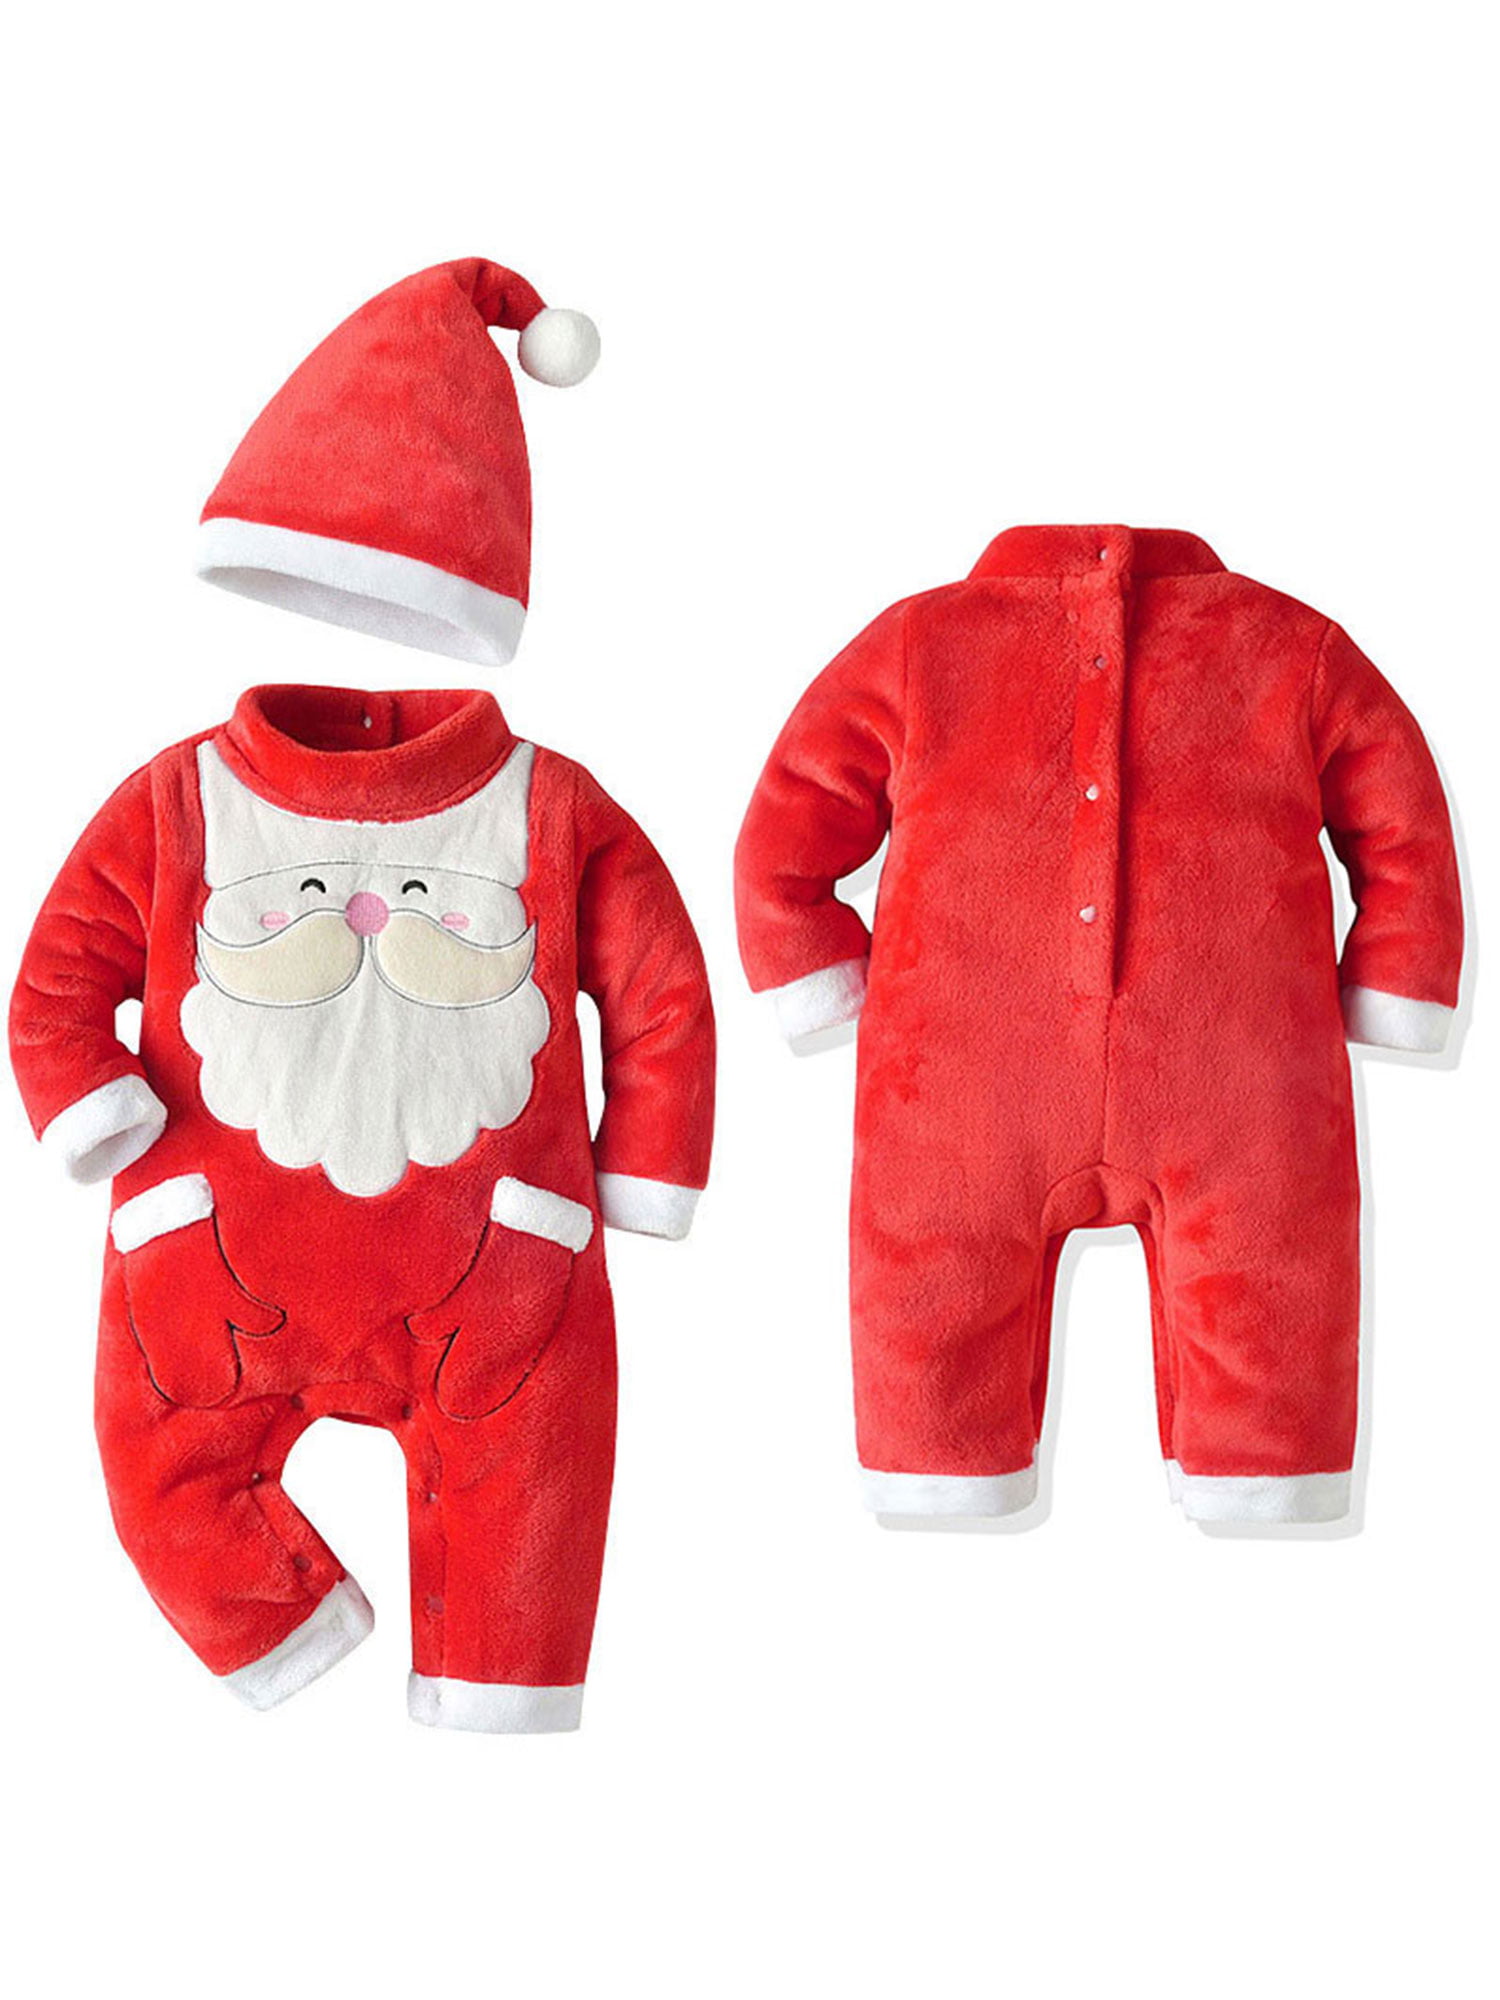 Newborn Infant Baby Boys Girl Bear Christmas Letter Romper Jumpsuit Outfit Red 